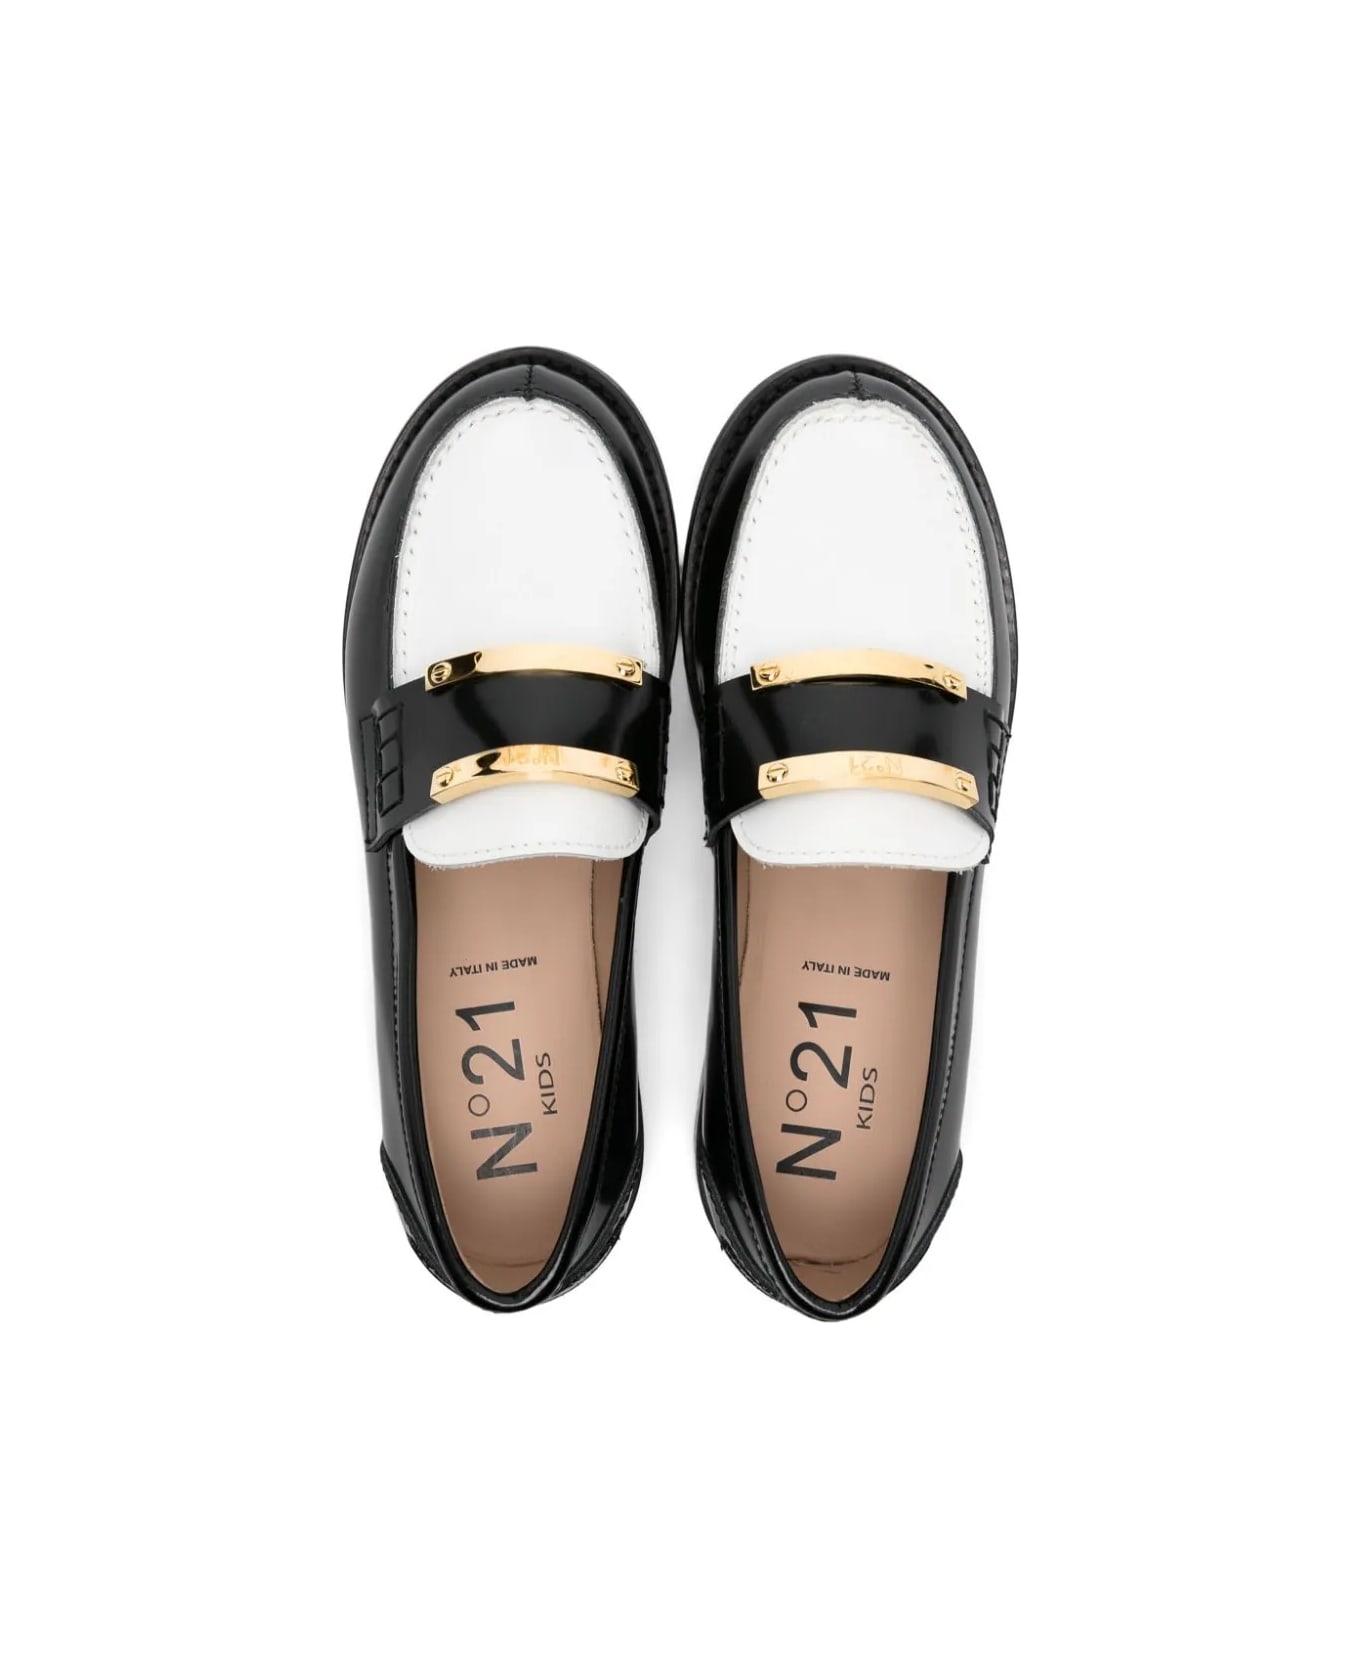 N.21 Loafers With Color-block Design - Black